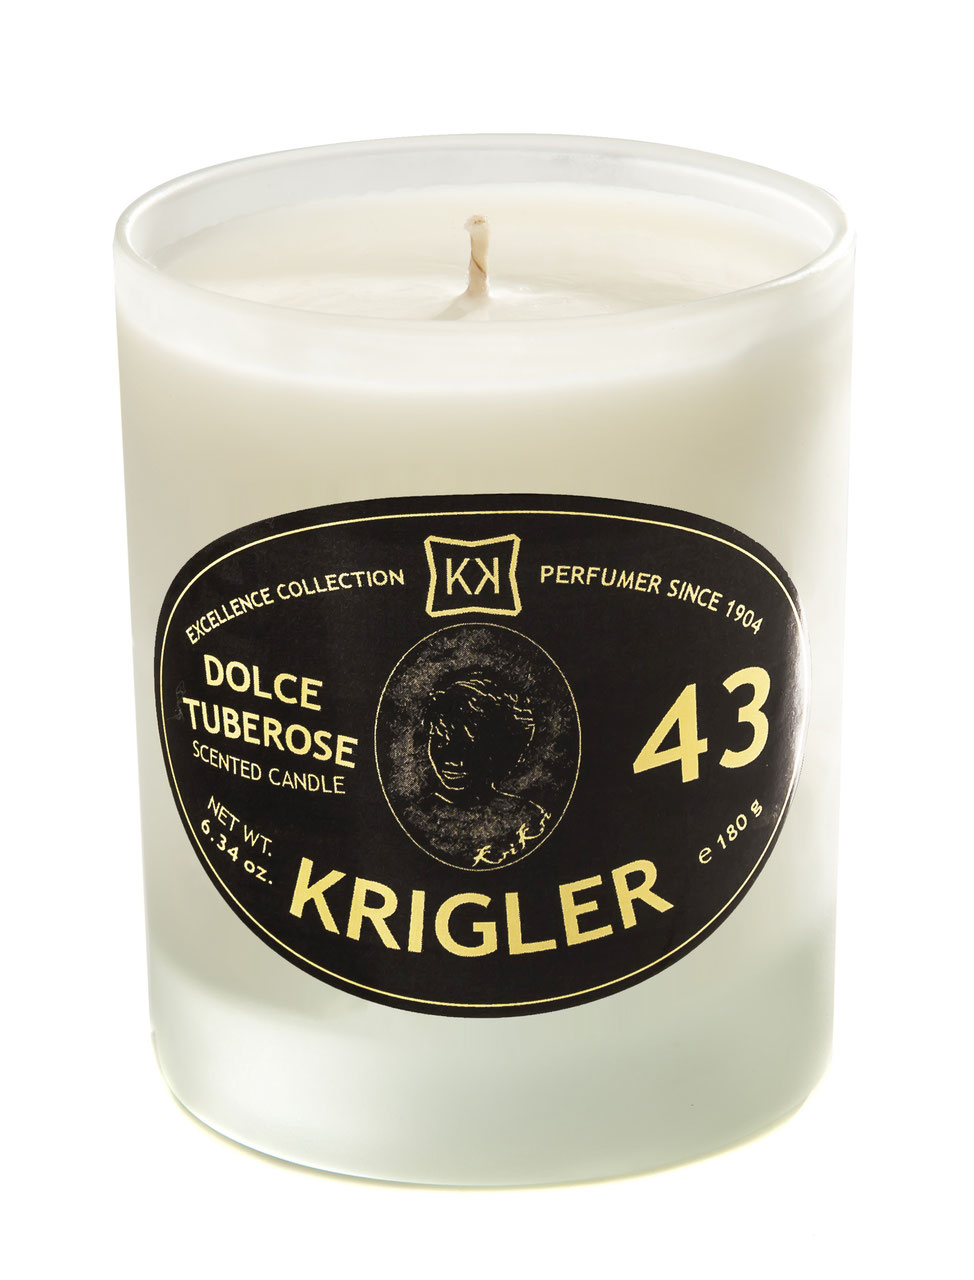 DOLCE TUBEROSE 43 Scented candle